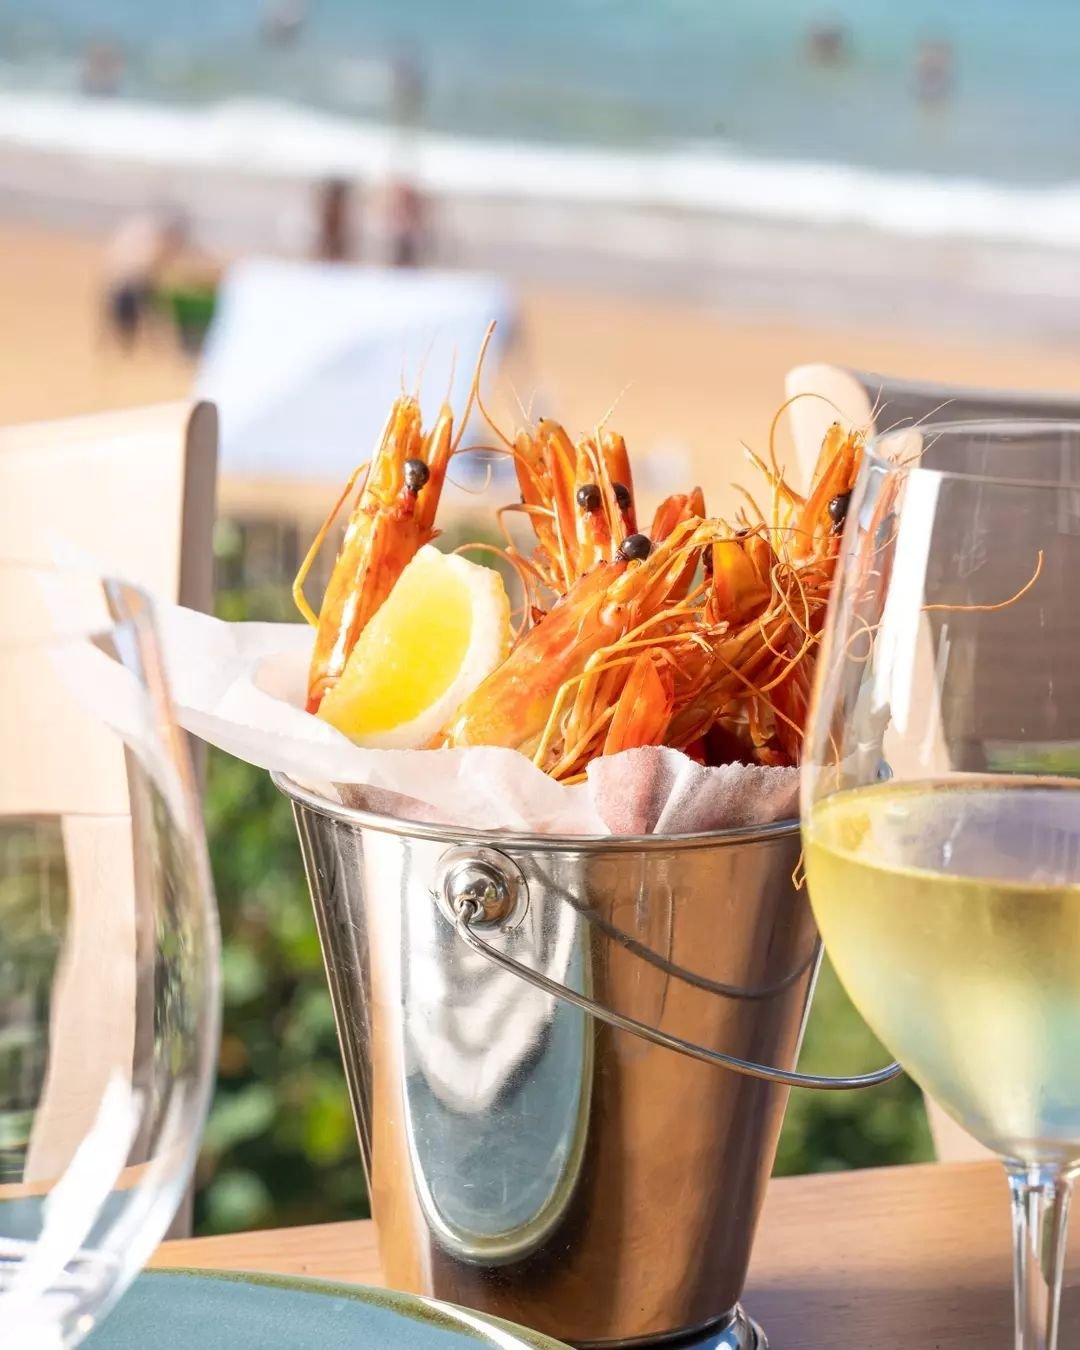 Who's ready for a Prawn Bucket with an ocean view?